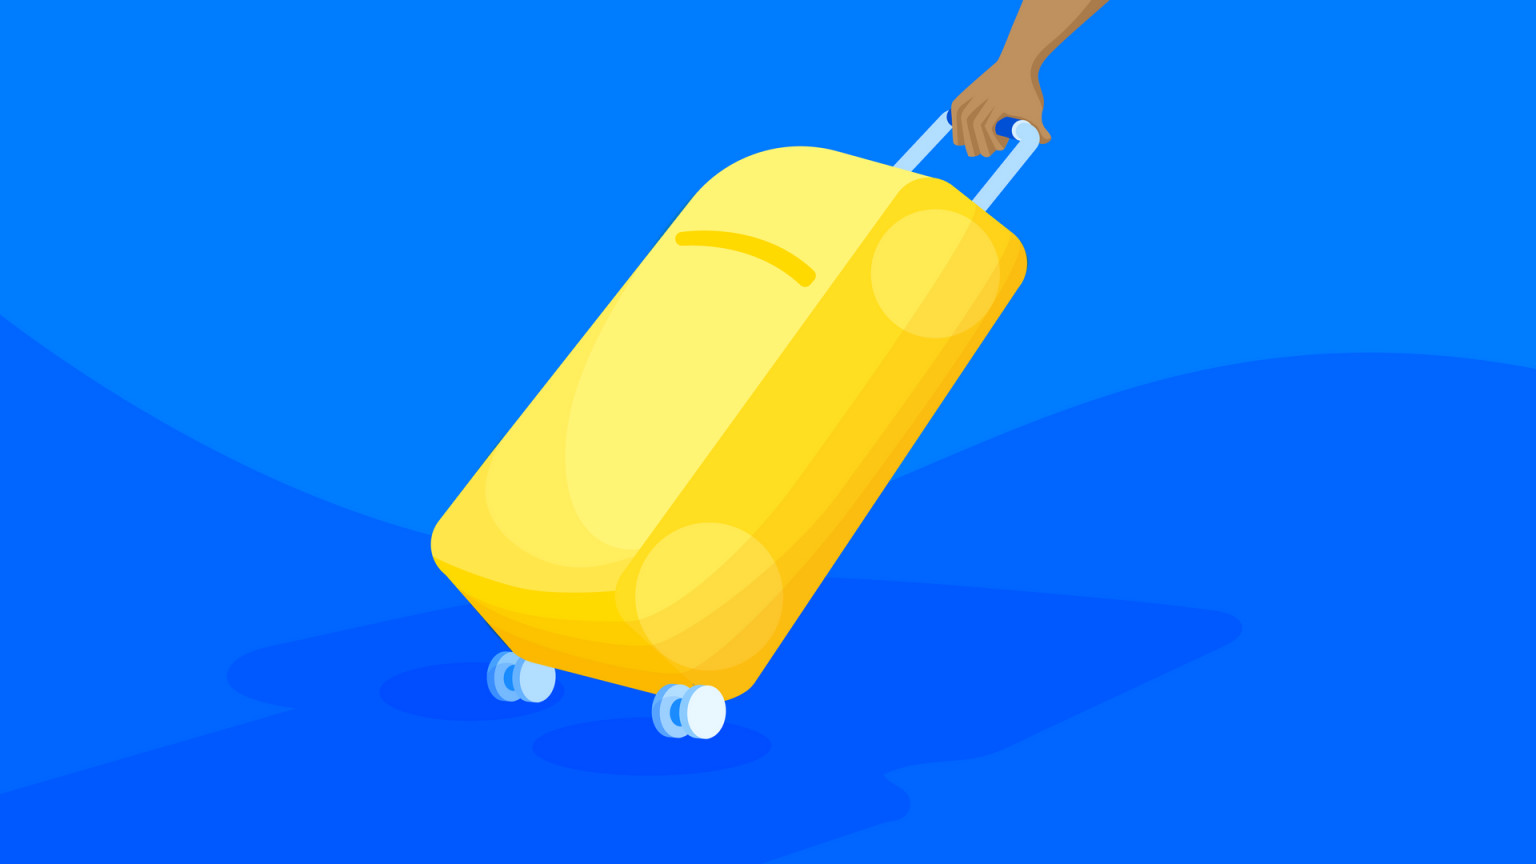 Illustration of a hand dragging a luggage bag with wheels, representing content migration from one platform to another